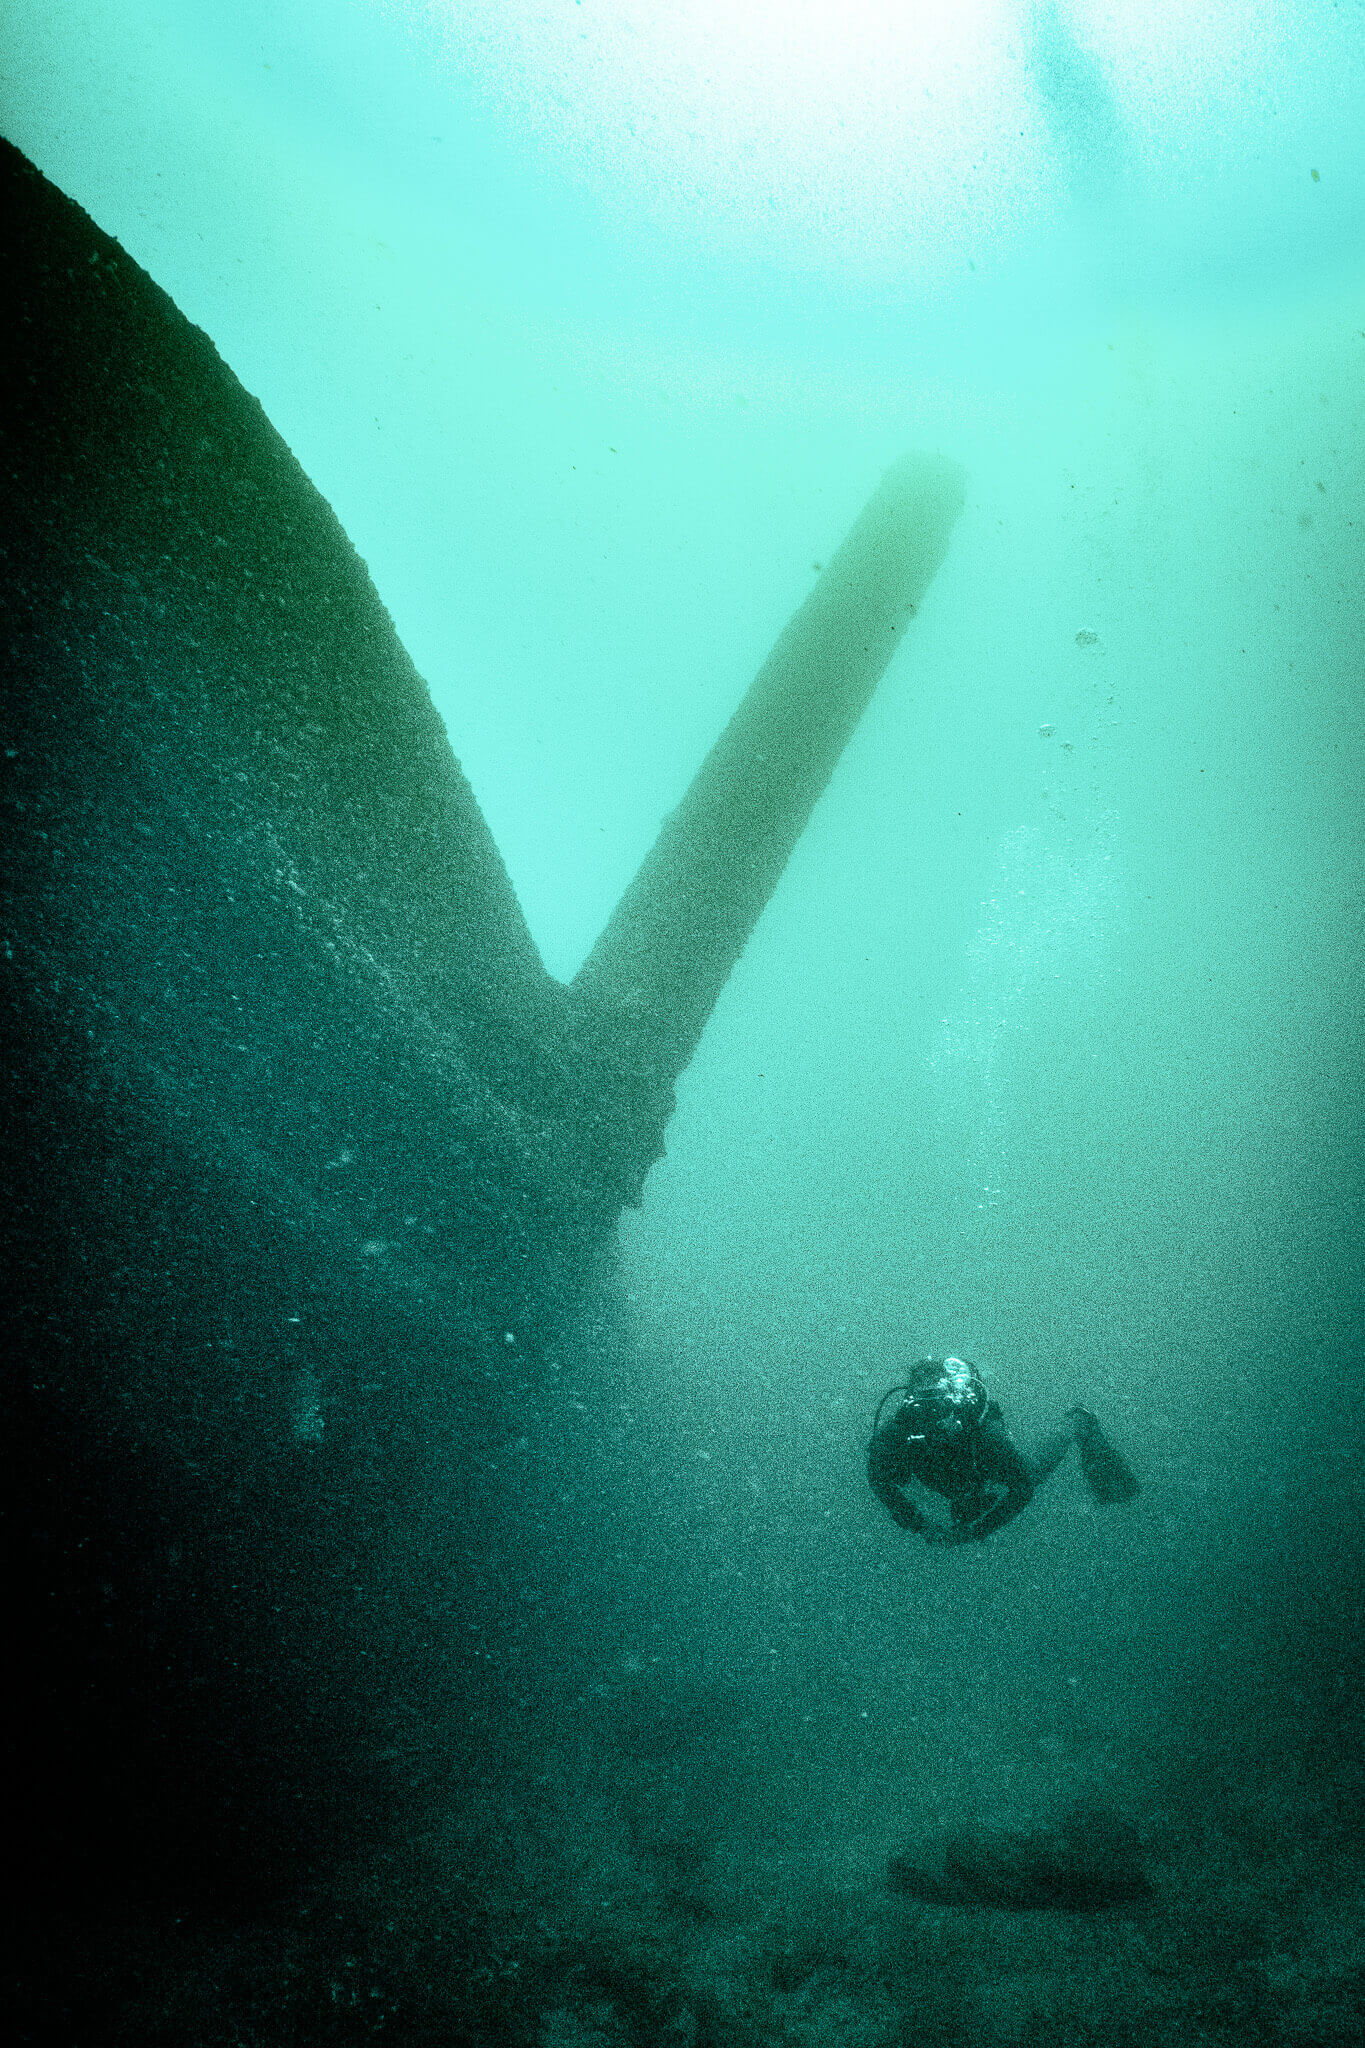 Underwater photo of the America shipwreck with its support legs